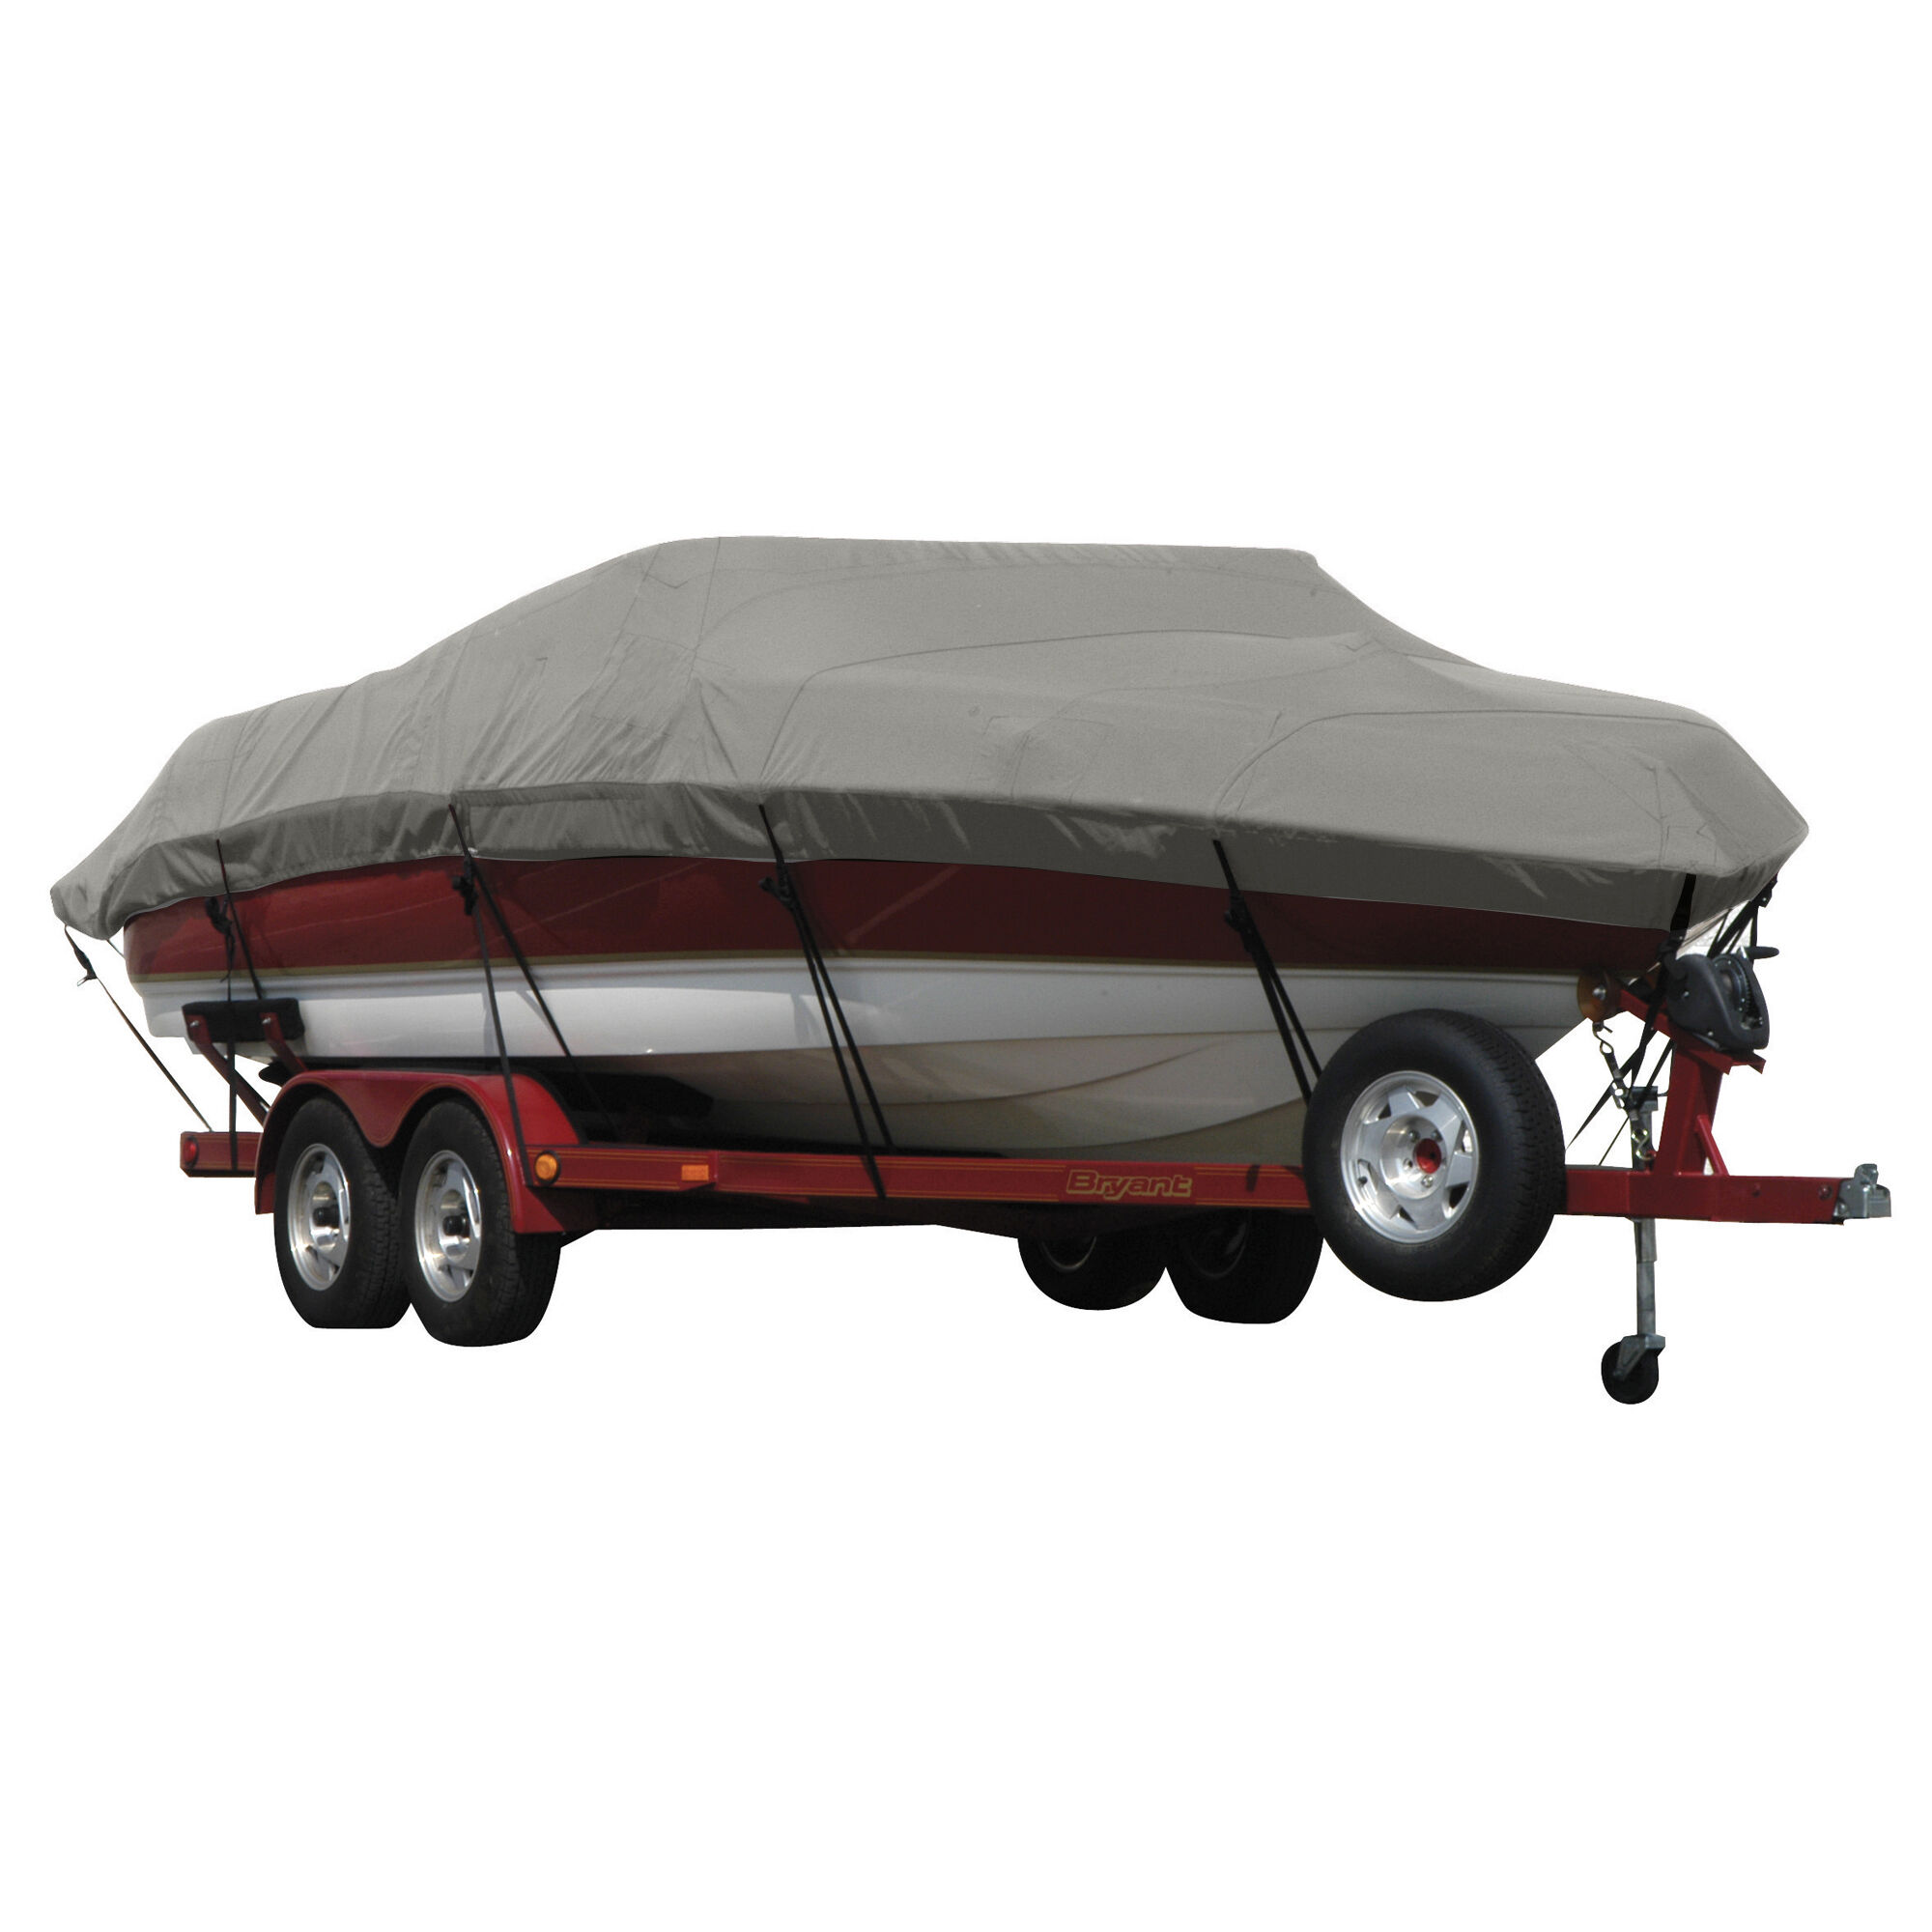 Covermate Exact Fit Sunbrella Boat Cover for Bayliner Classic 192 Ey Classic 192 Ey Does Not Accommodate Strb Ladderi/O. Charcoal Grey Heather in